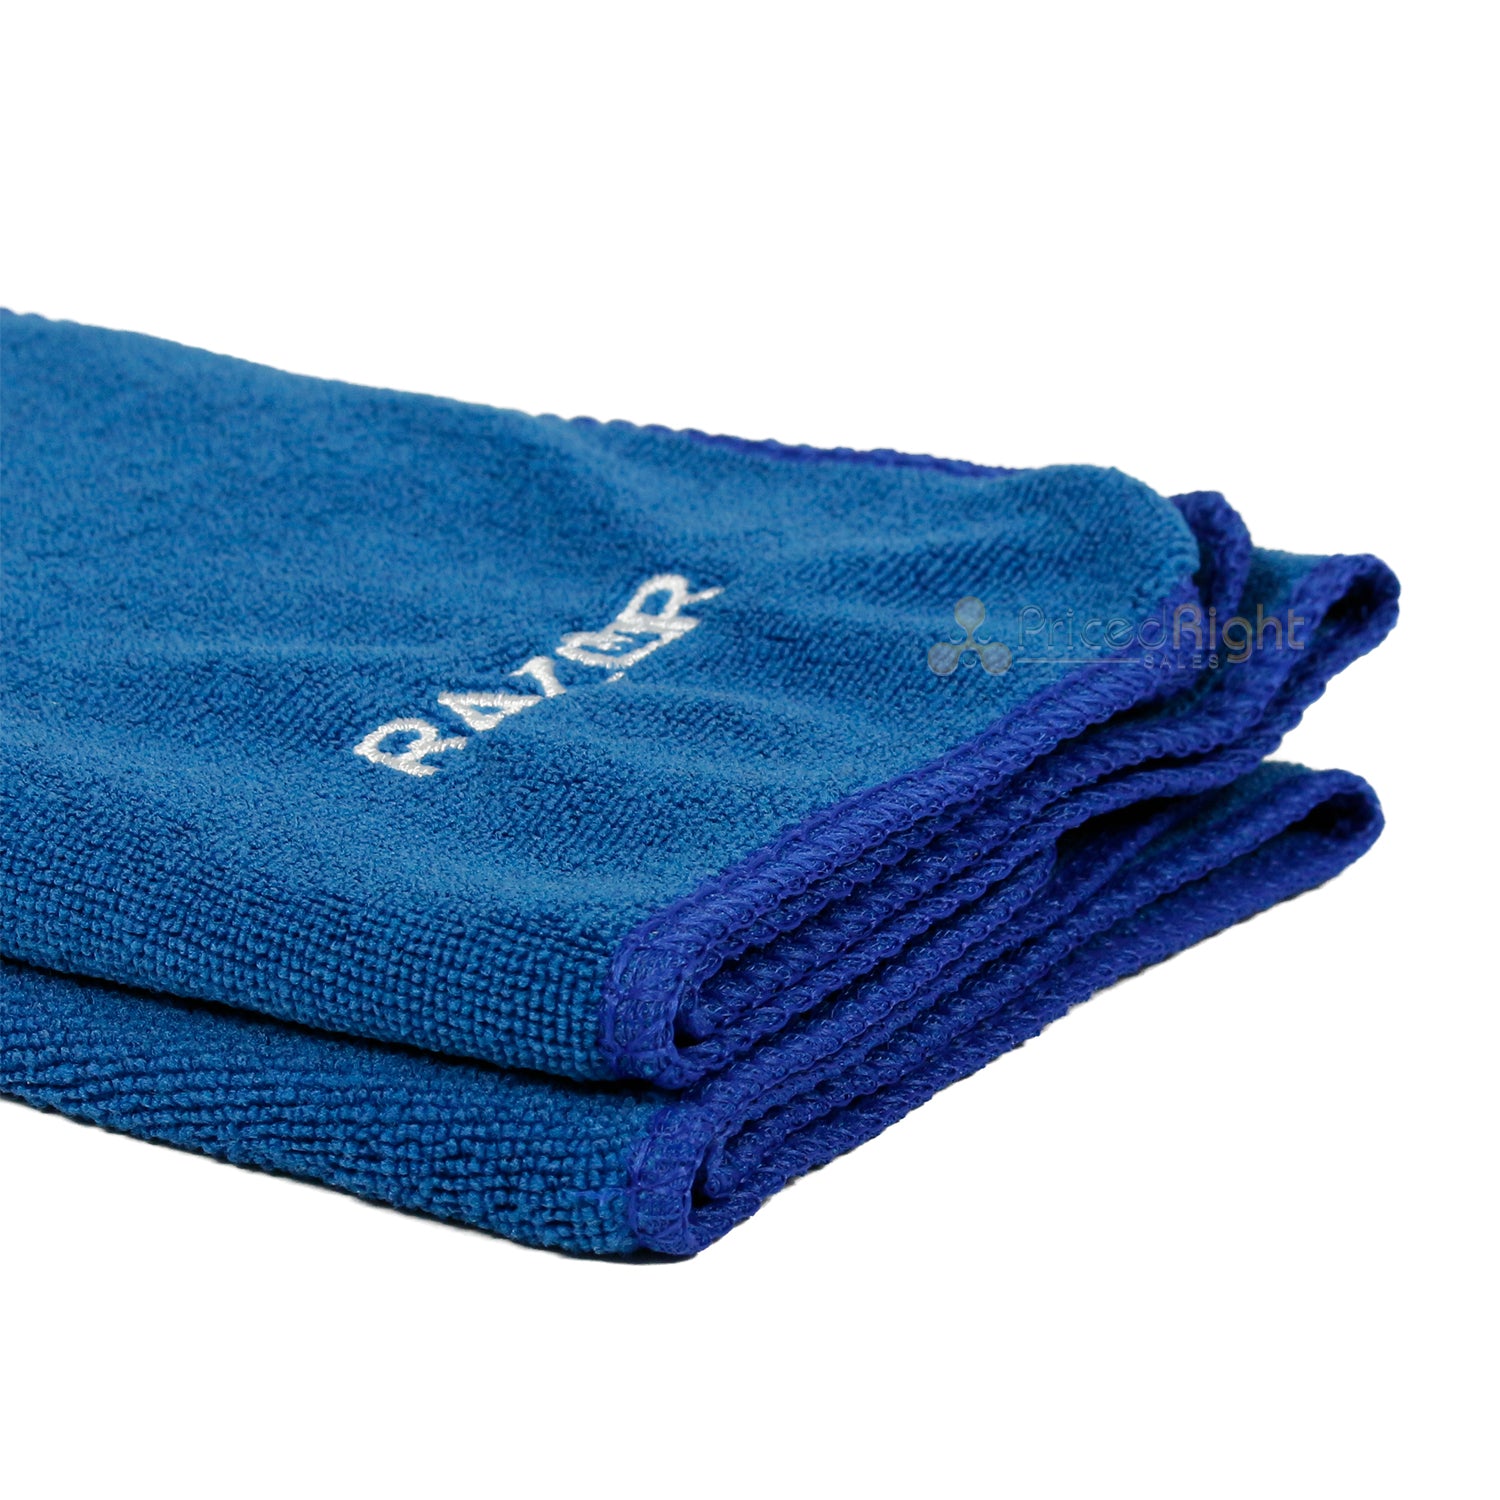 Razor Microfiber Cleaning Cloth Griddle Towels Lint-Free Machine Washable 2 Pack